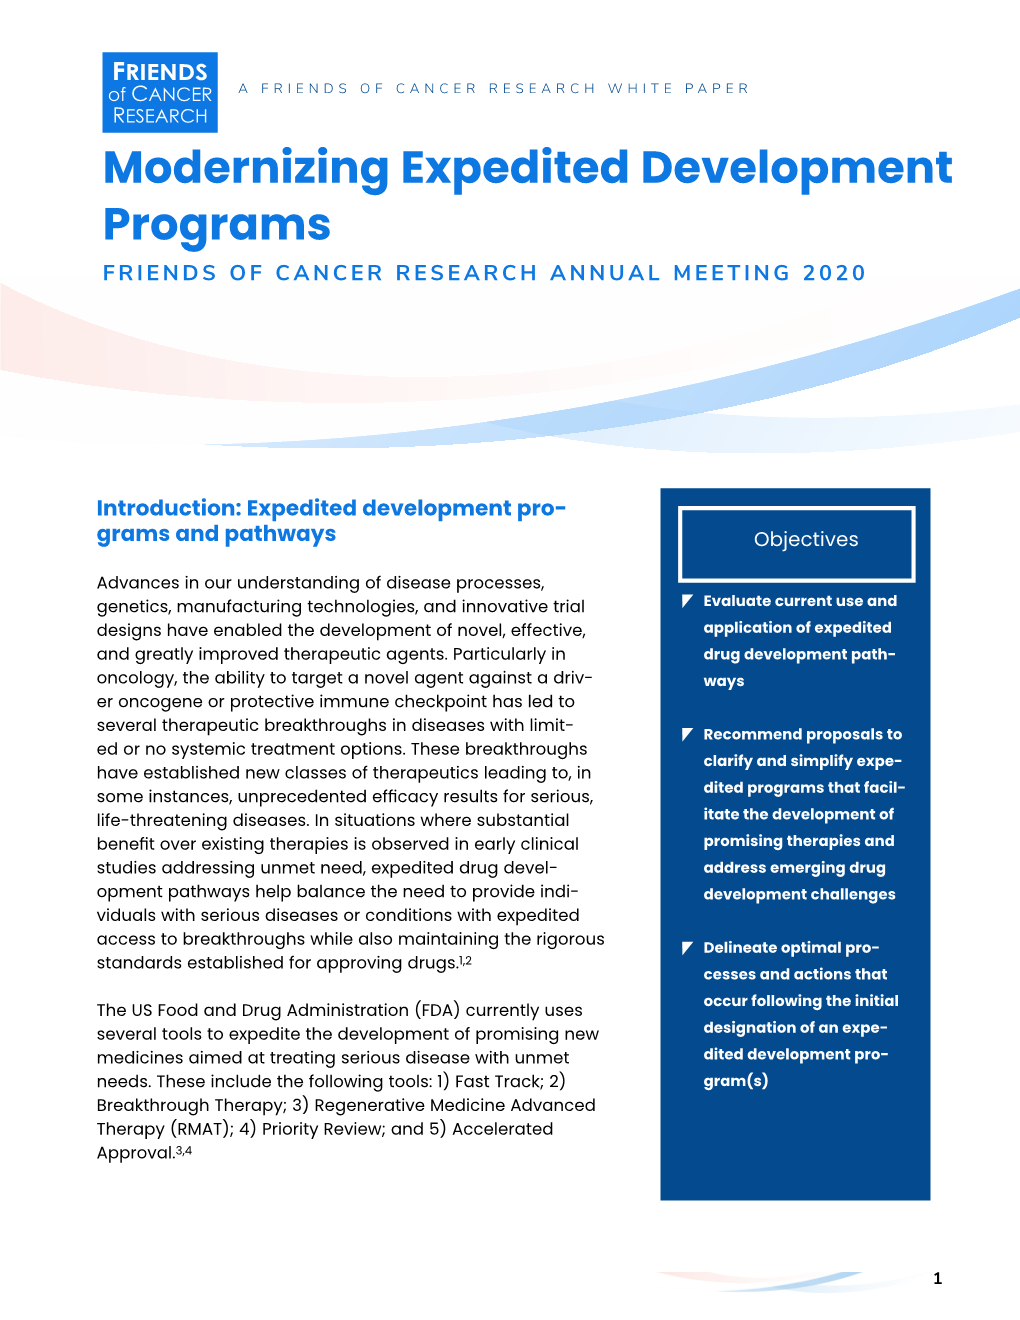 Modernizing Expedited Development Programs FRIENDS of CANCER RESEARCH ANNUAL MEETING 2020